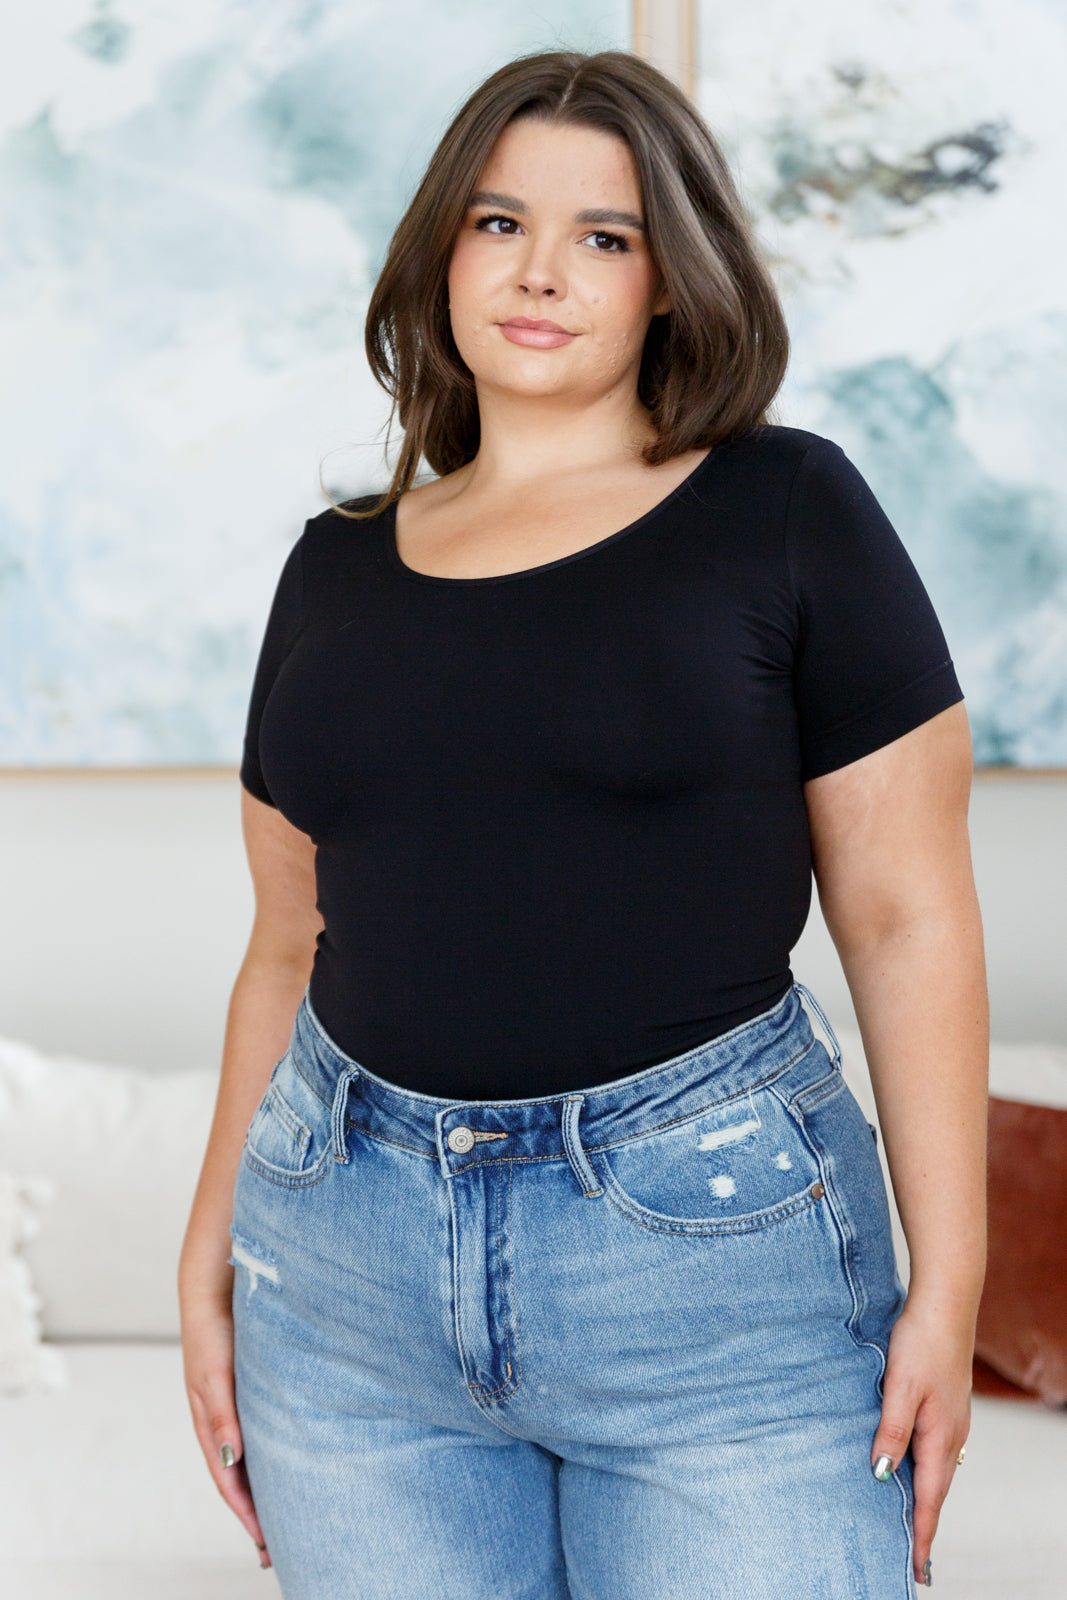 The Everyday Scoop Neck Short Sleeve Top is the perfect sleek and fitted base for any look